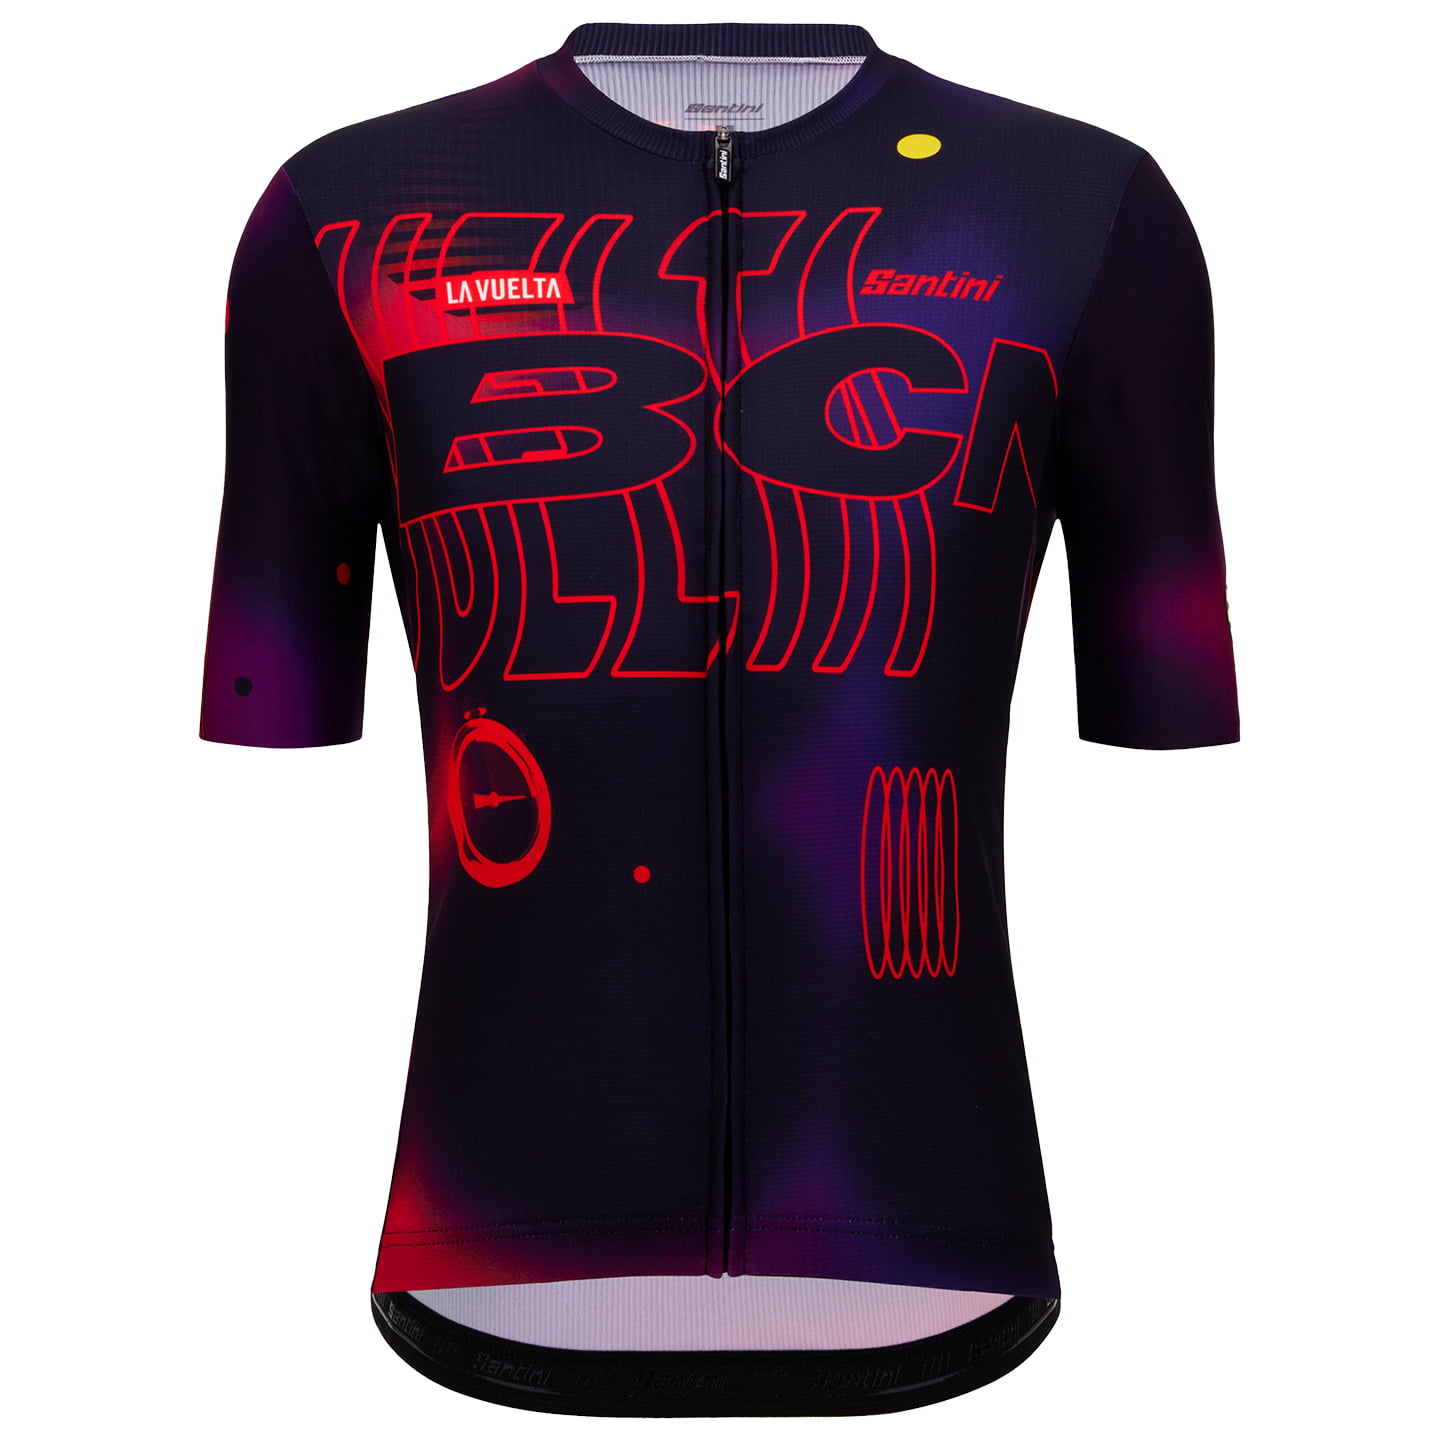 LA VUELTA Barcelona 2023 Short Sleeve Jersey, for men, size M, Cycle jersey, Cycling clothing